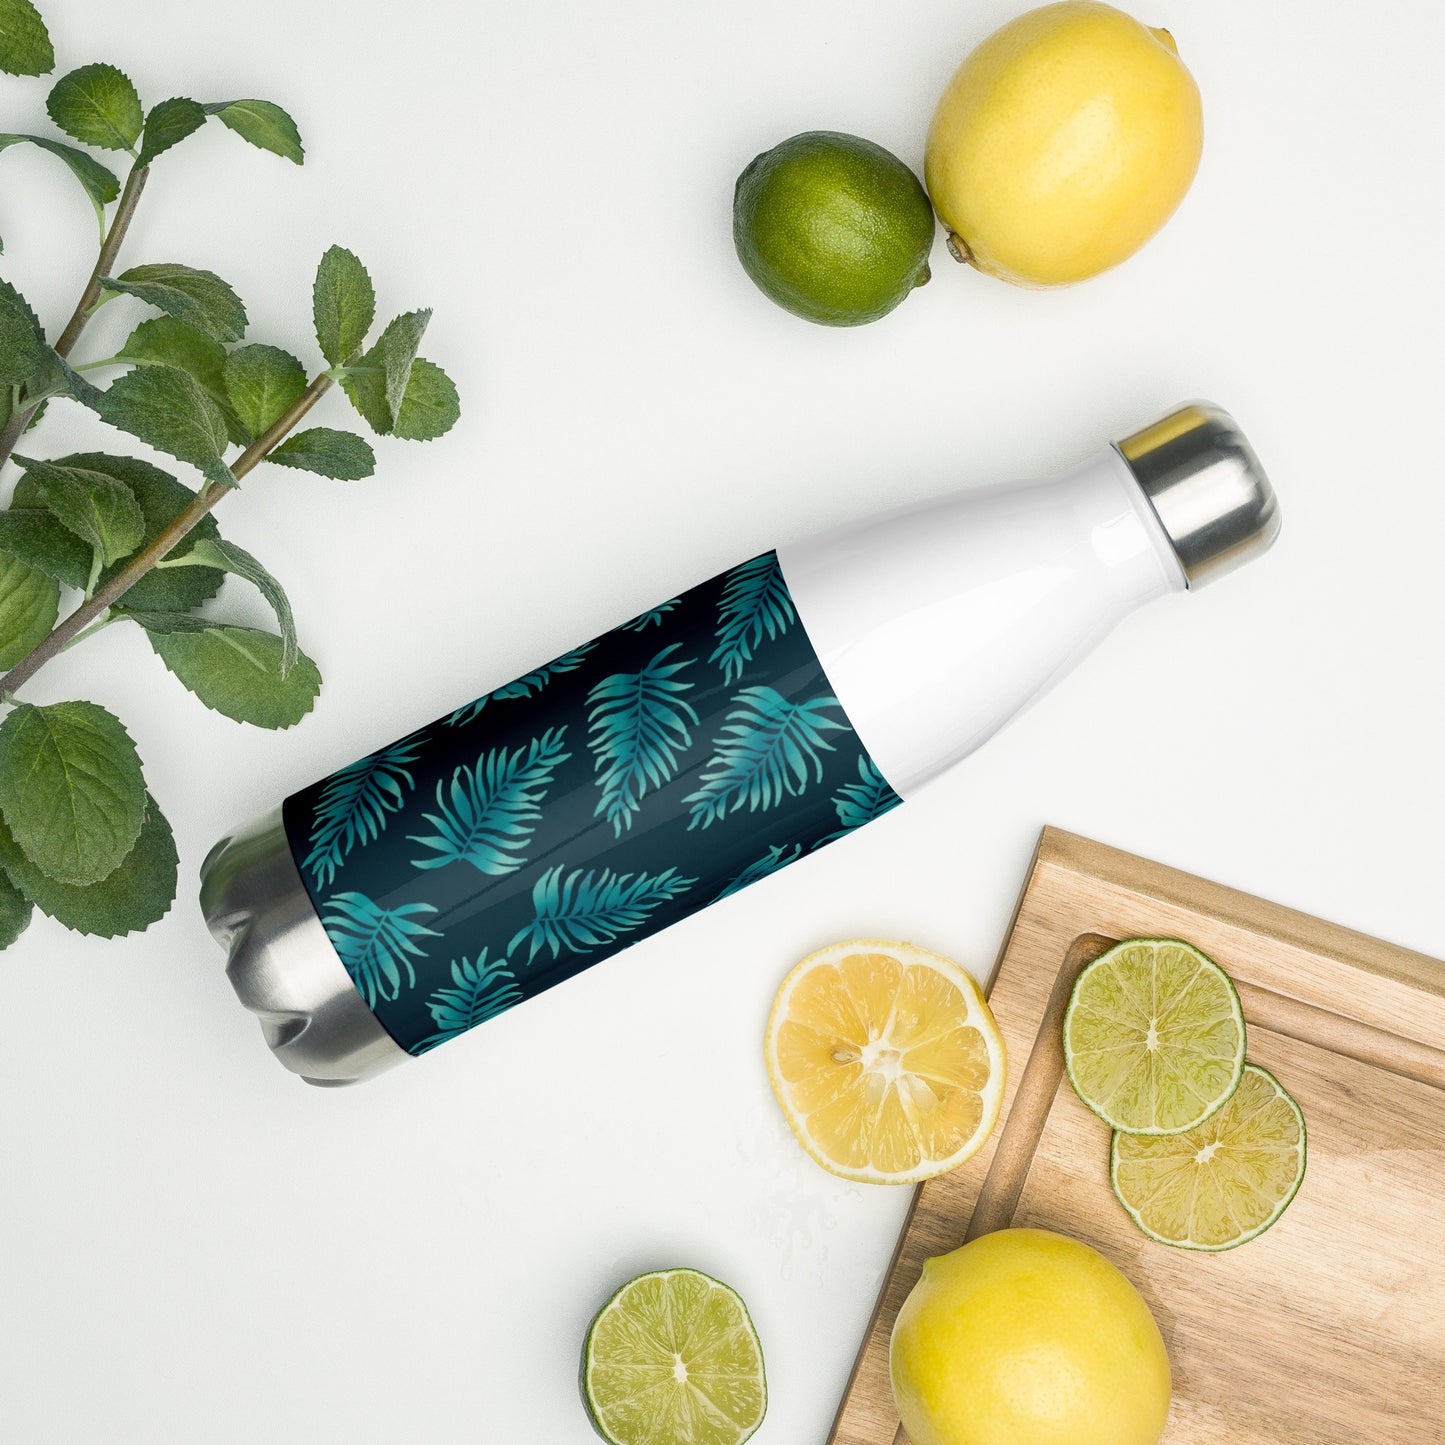 Stainless Steel Water Bottle - Palm Leaves in Blue Ombre